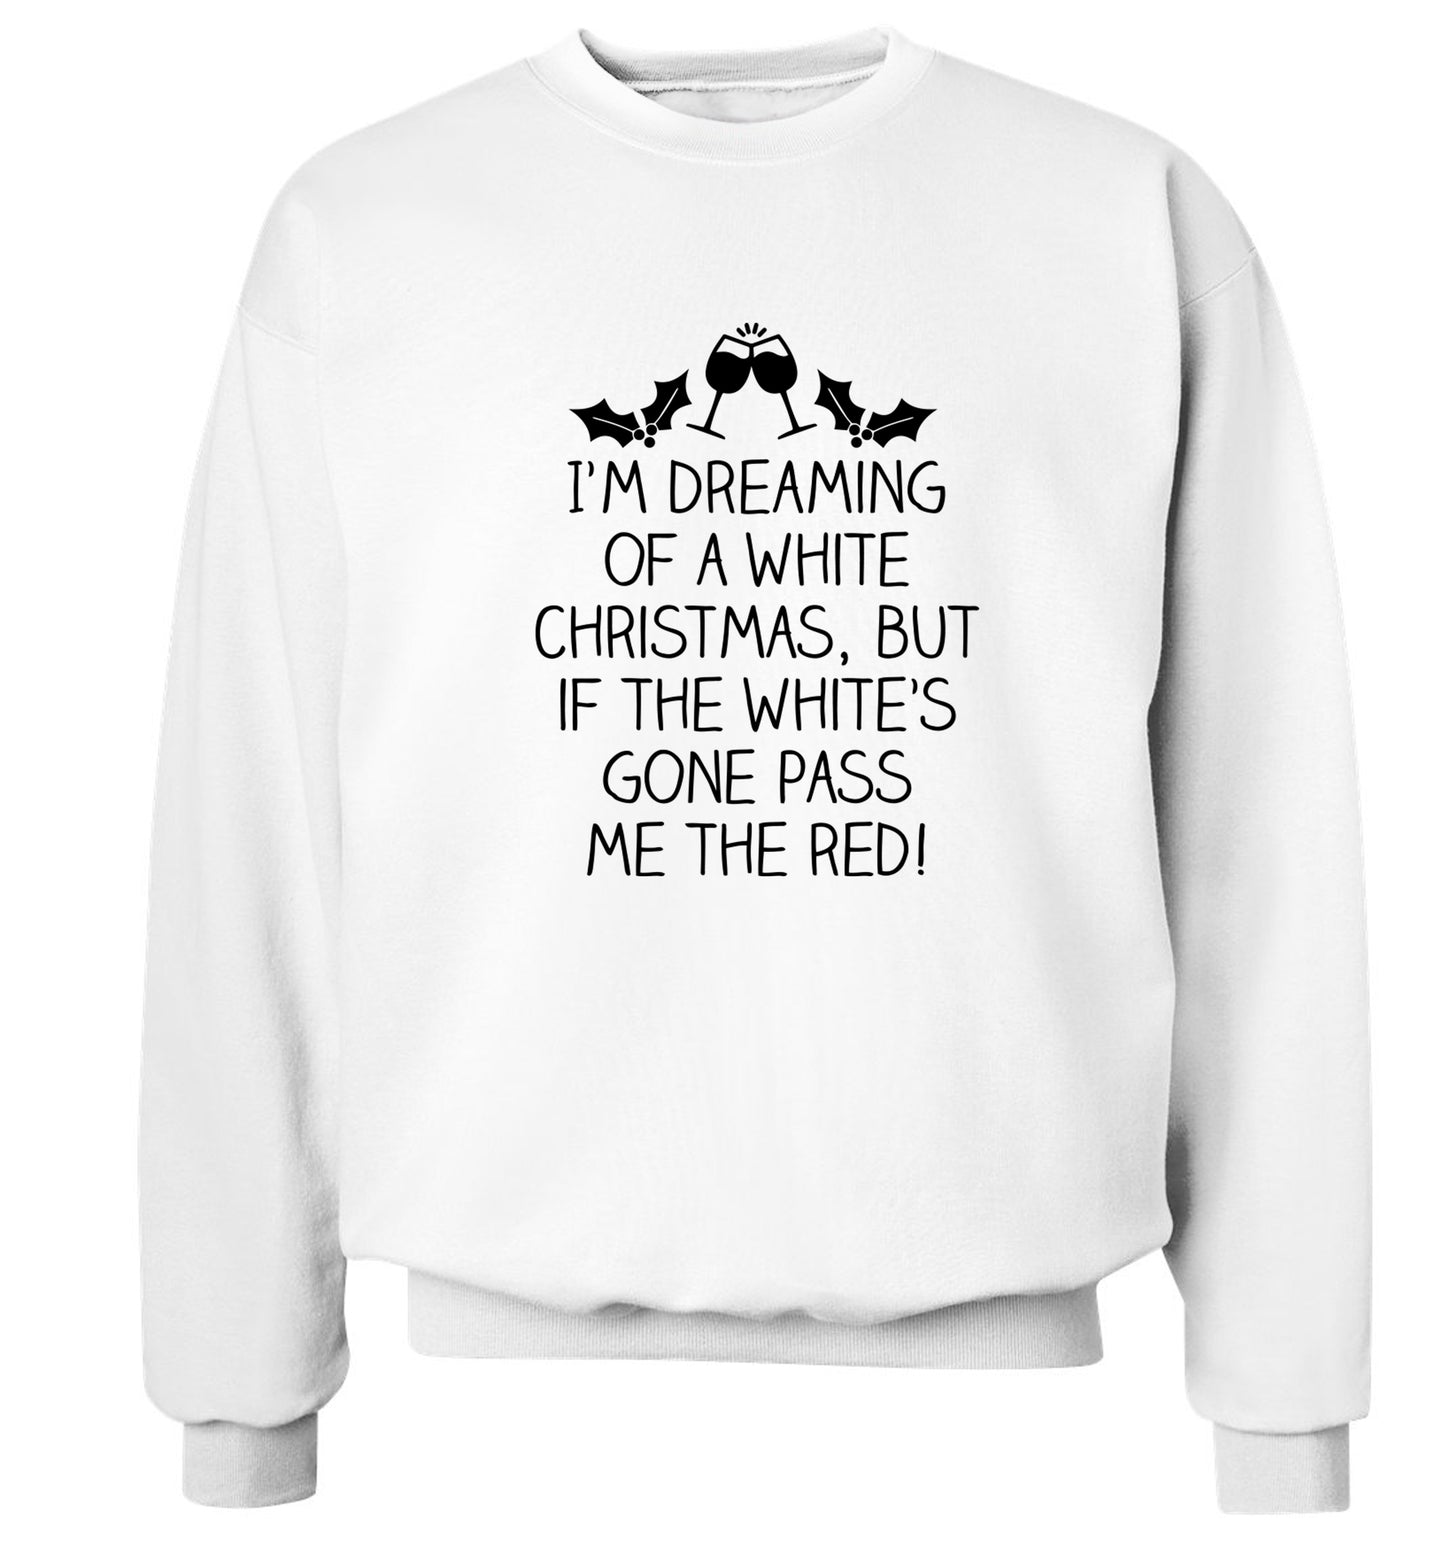 I'm dreaming of a white christmas, but if the white's gone pass me the red! Adult's unisex white Sweater 2XL